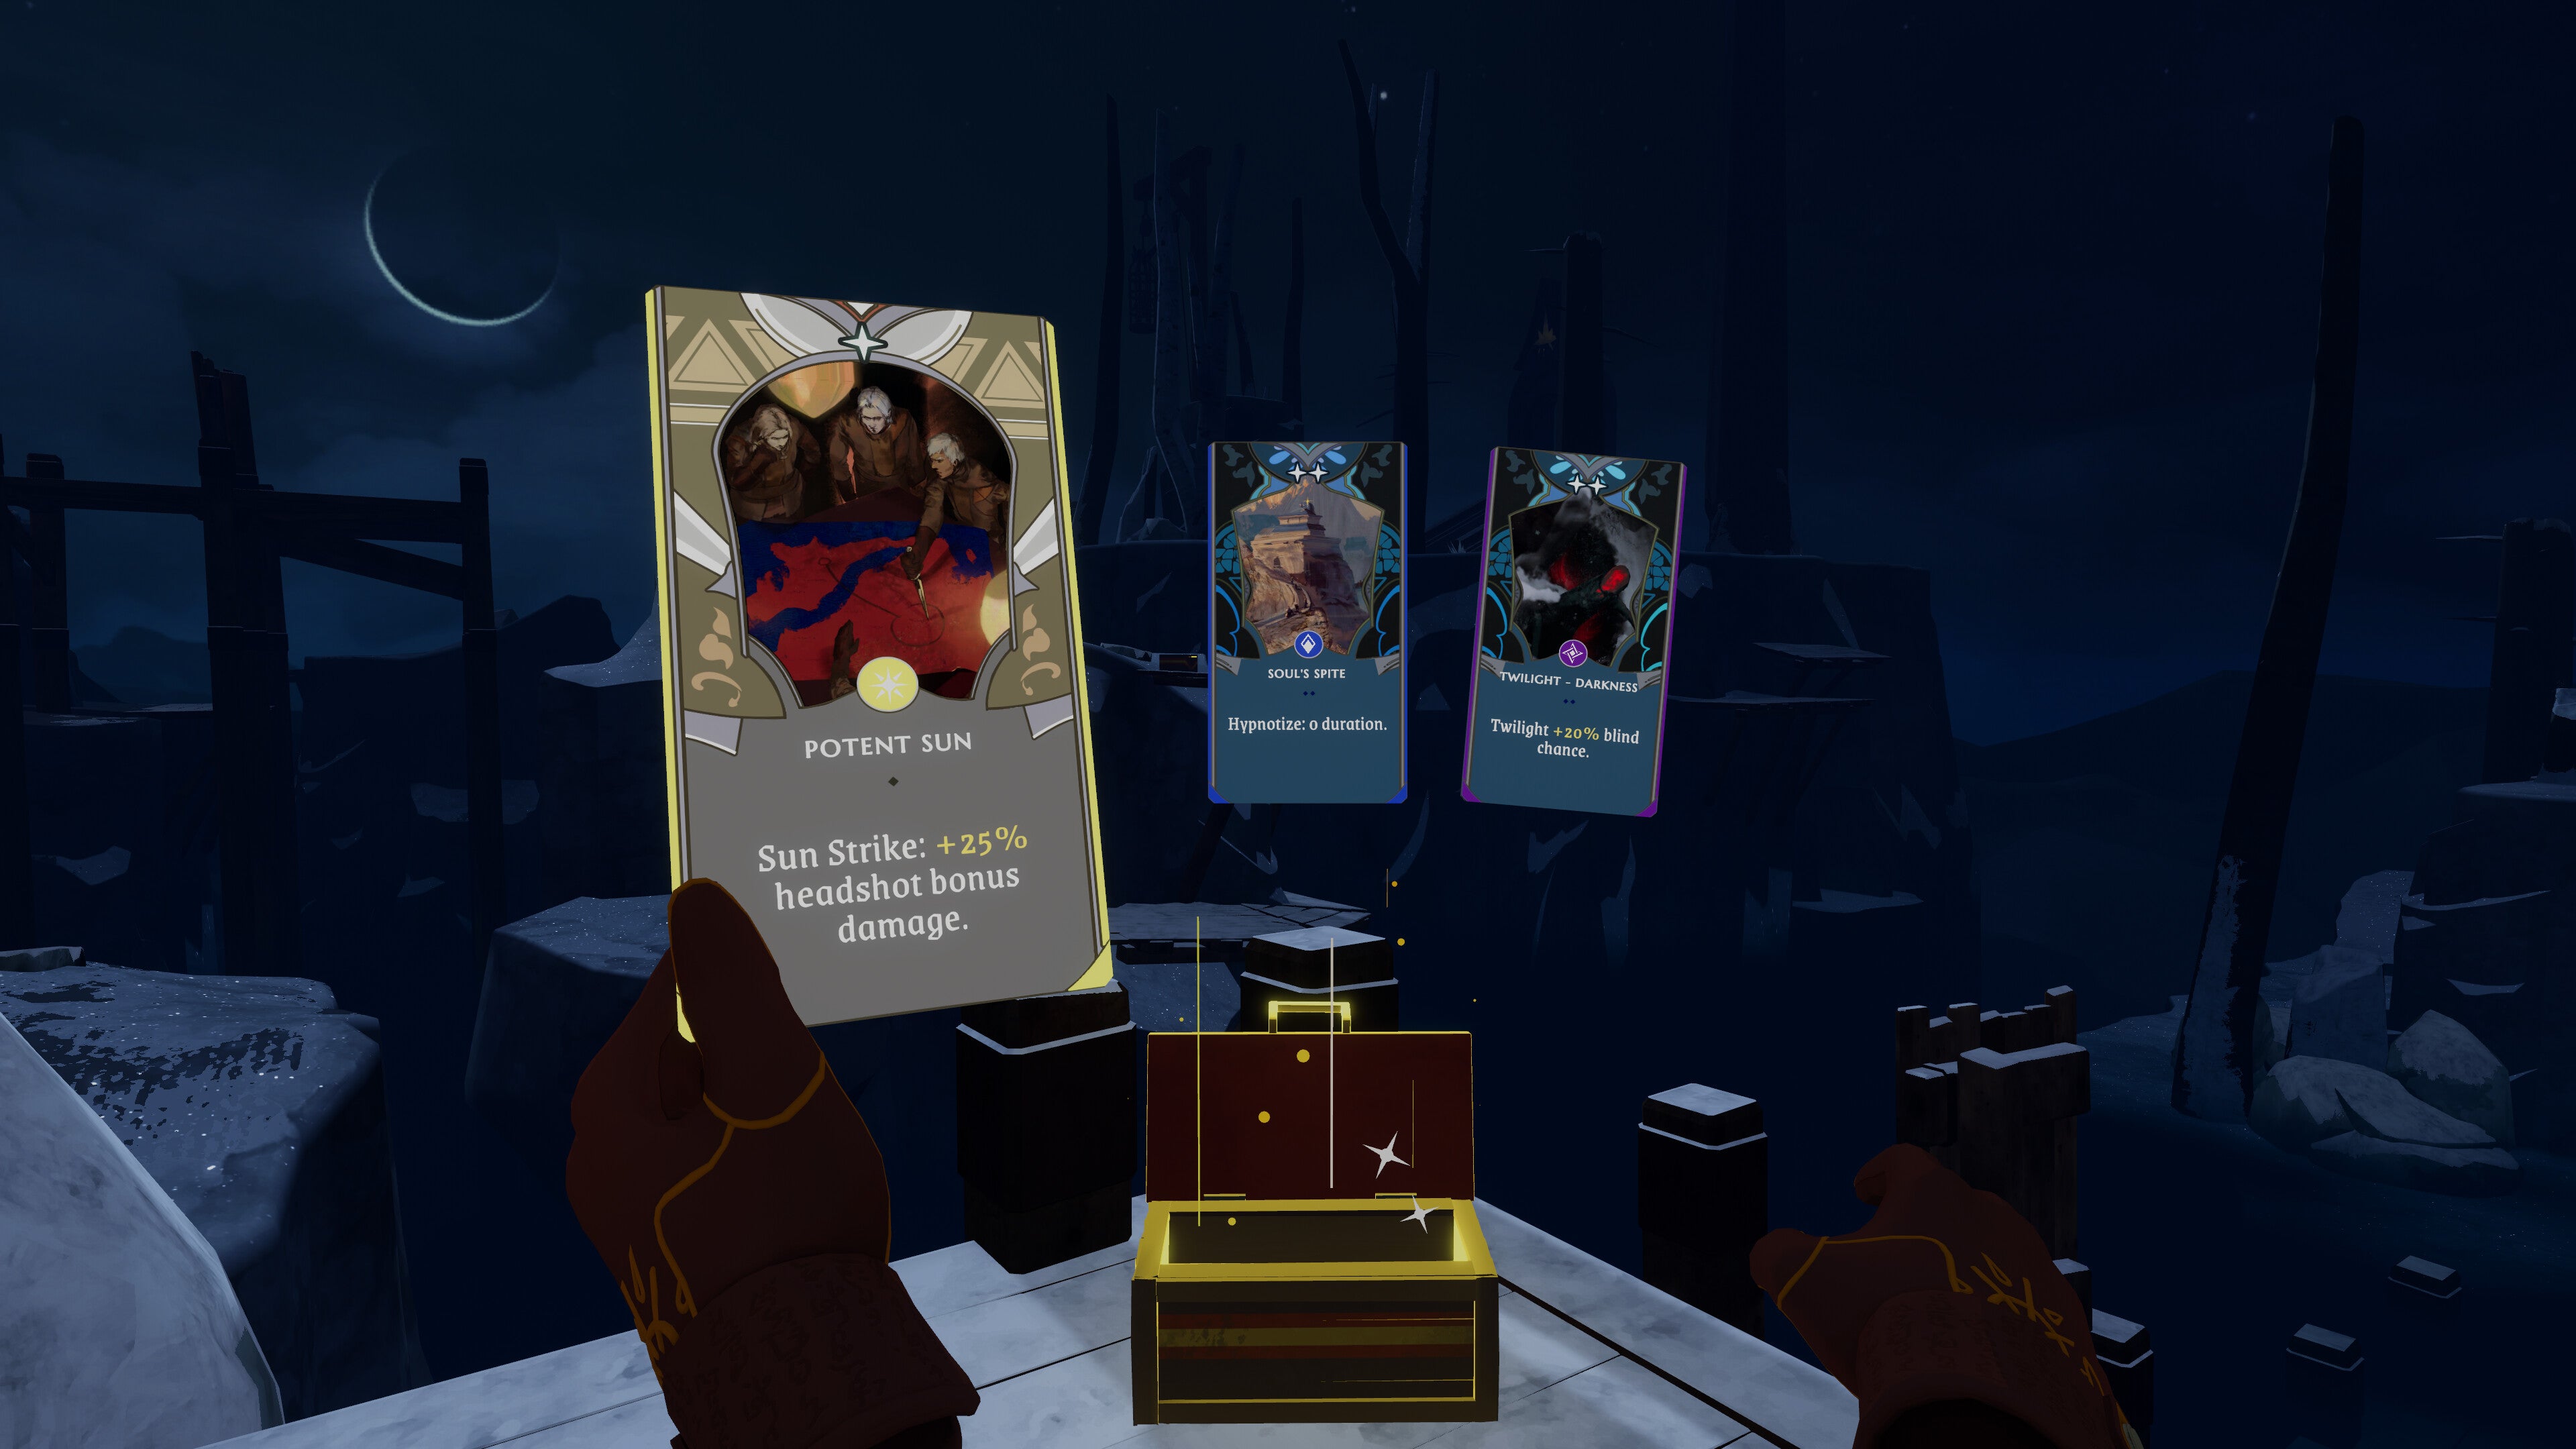 Pick an ability card in VR roguelike The Light Brigade - the player is holding a card called Potent Sun, which takes +25% more damage when shot in the head